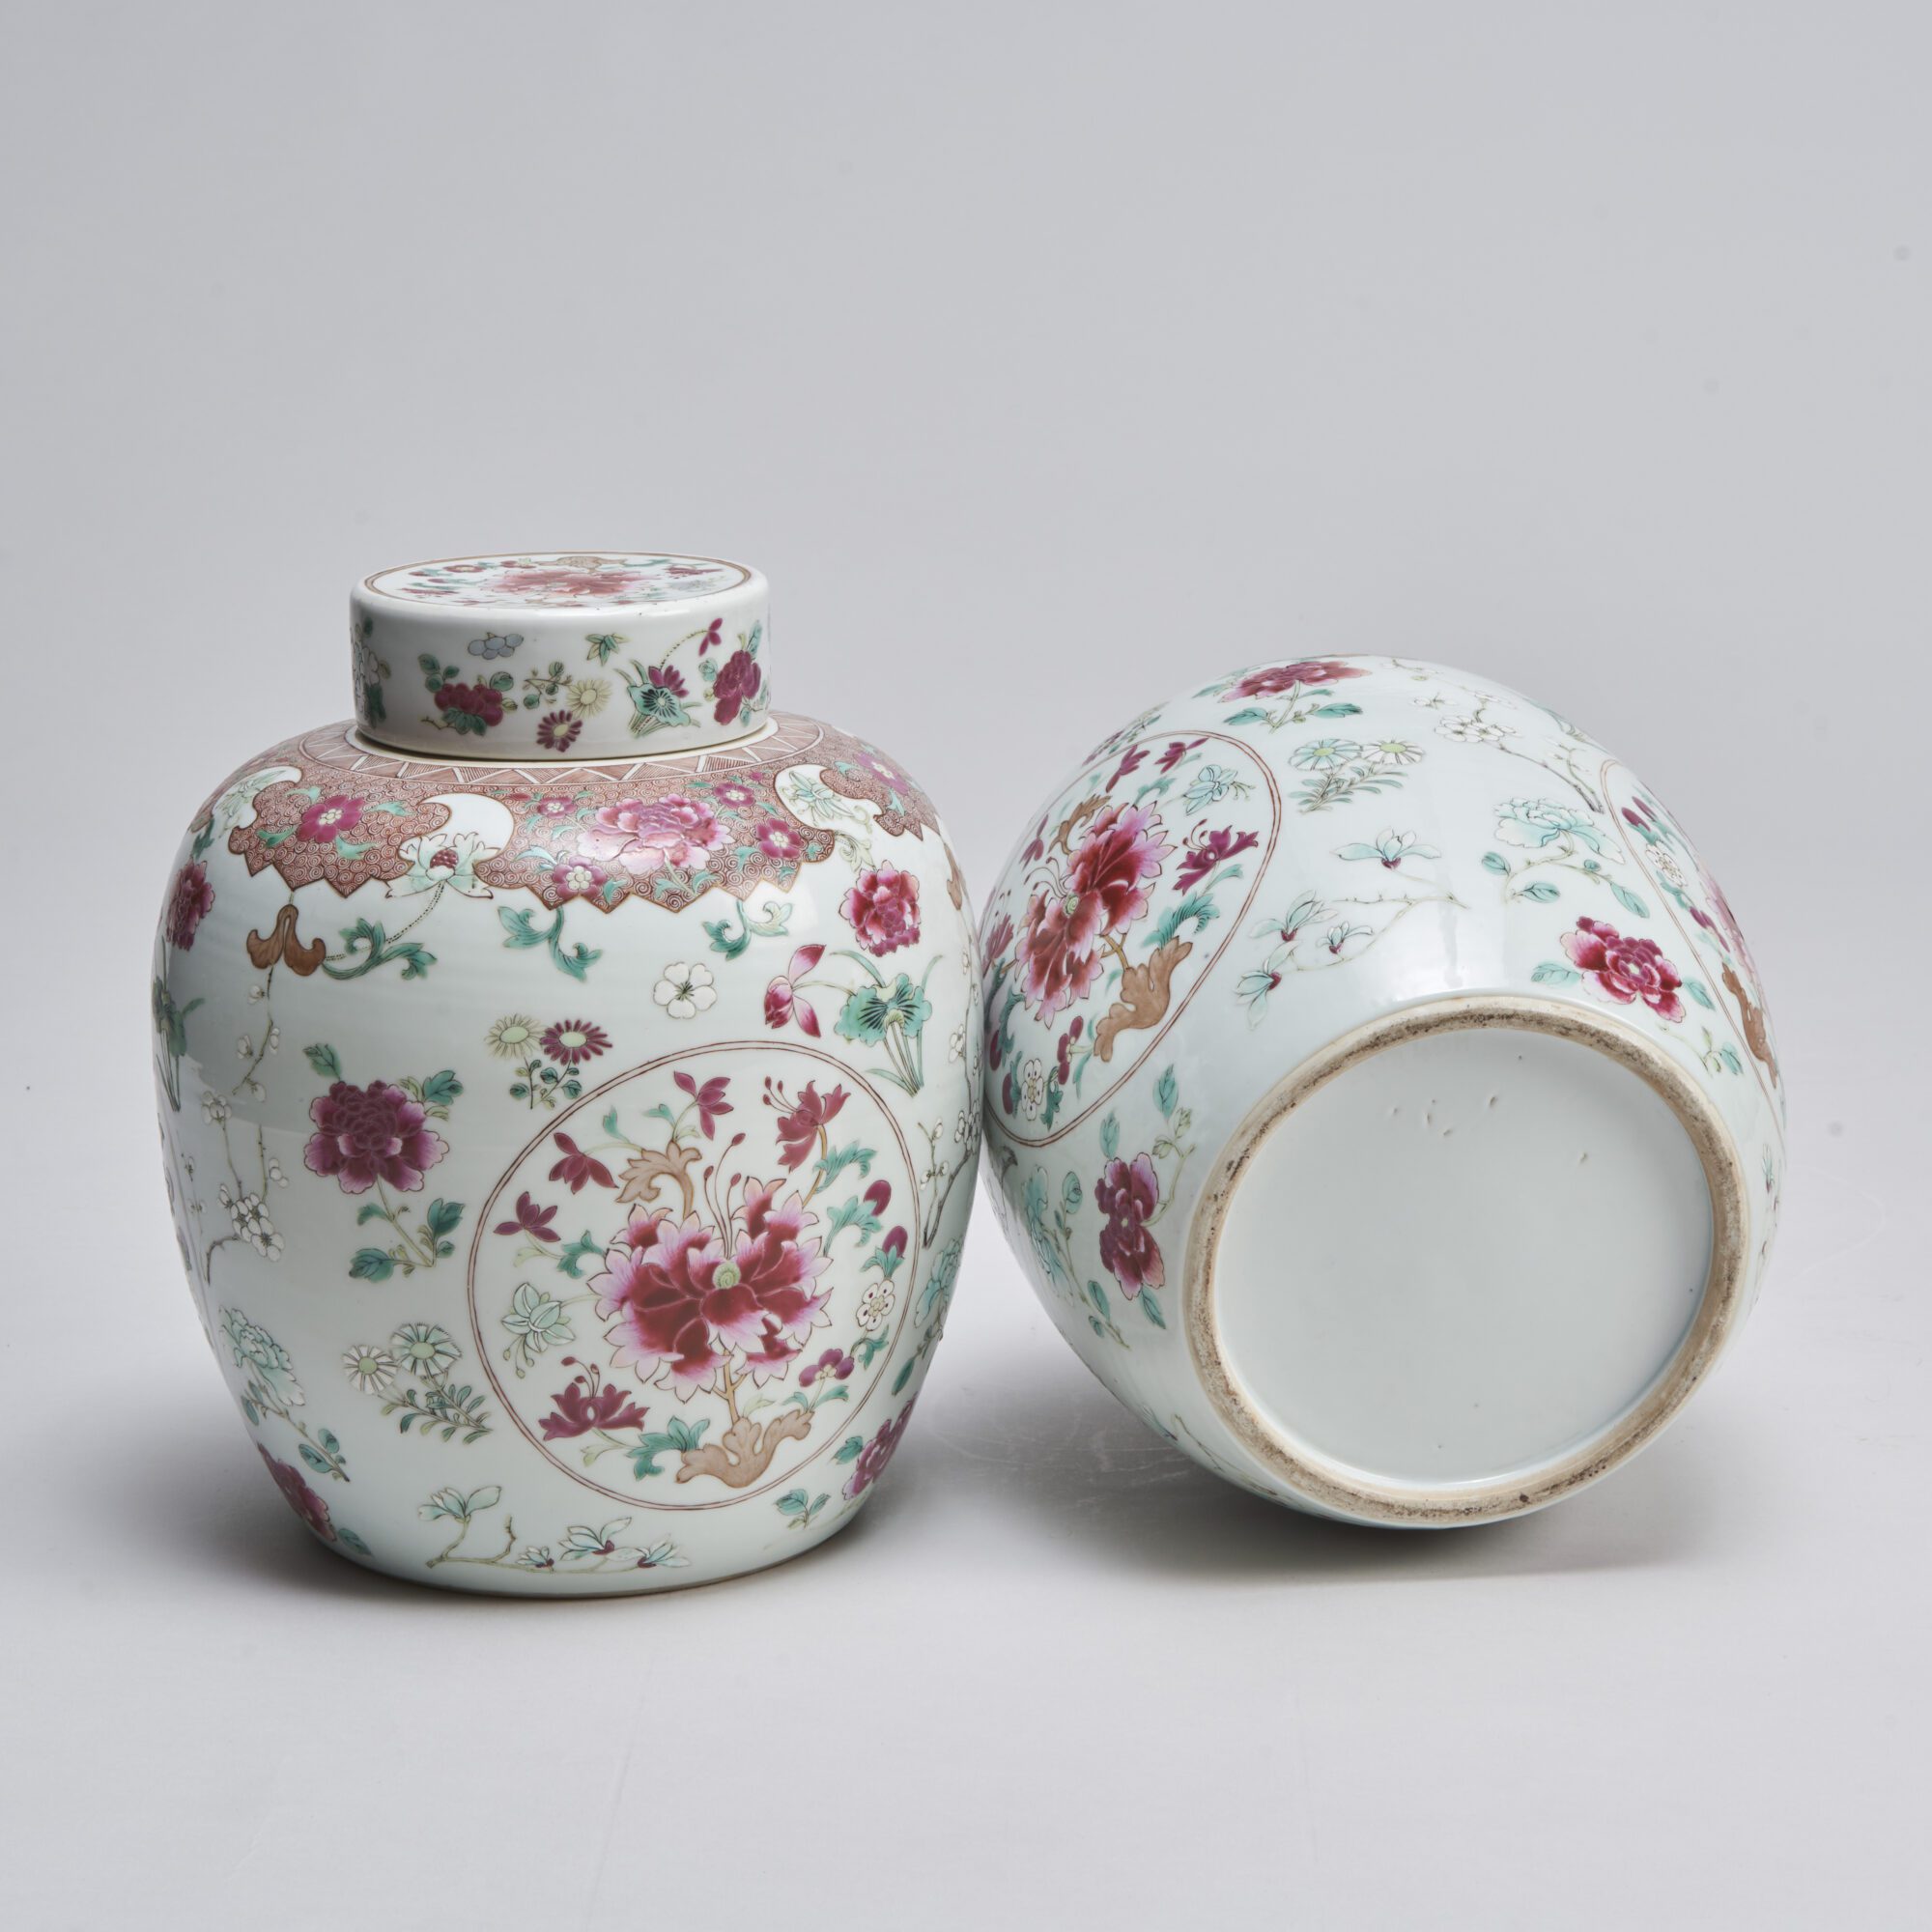 An ornate pair of 19th Century Chinese famille rose jars and covers from Kevin Page